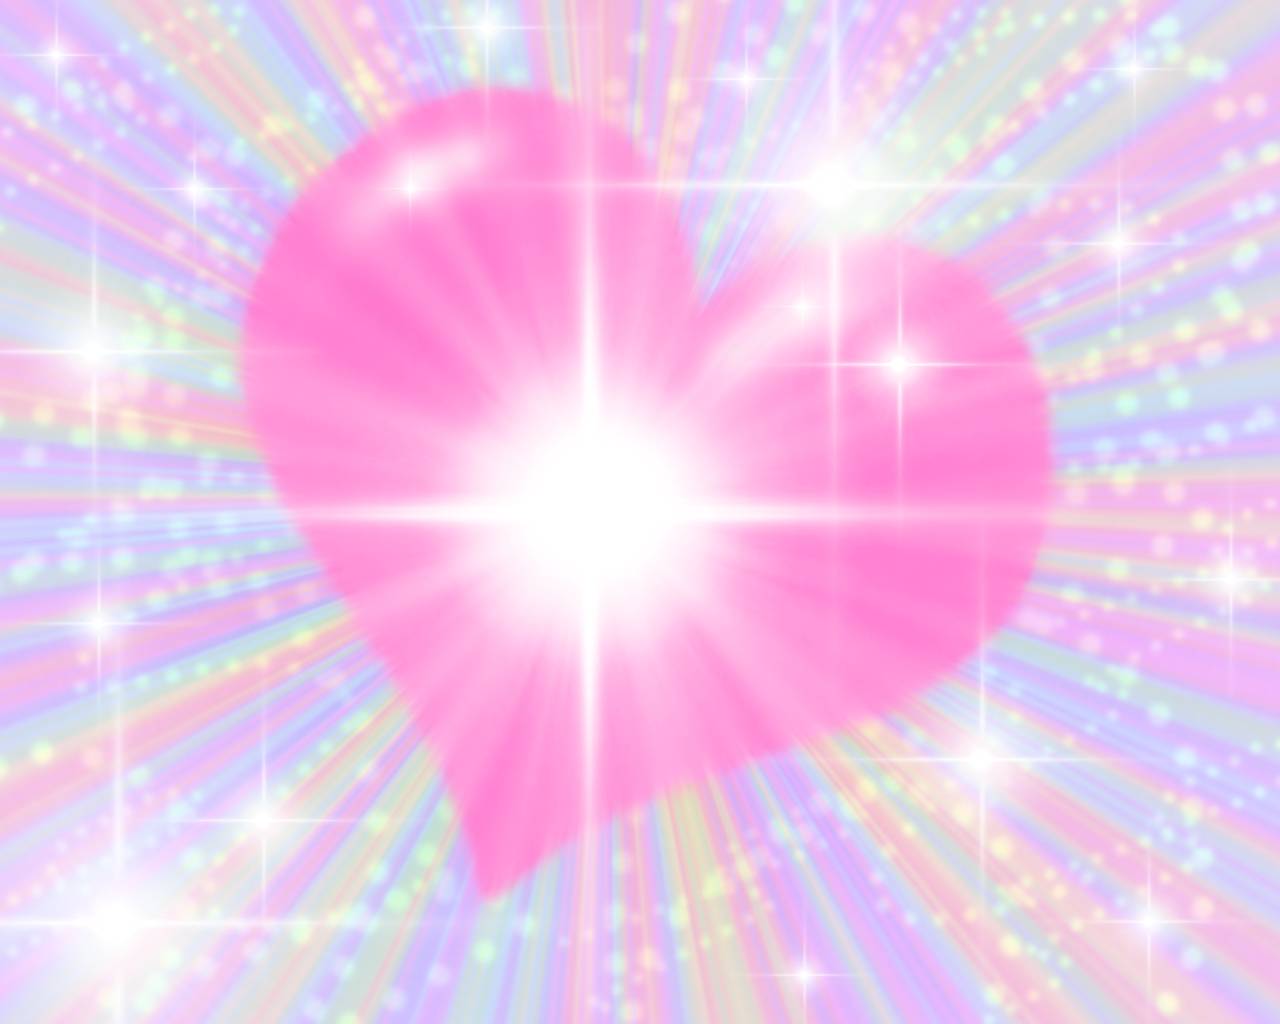 Hot Pink Heart Background Images amp Pictures   Becuo